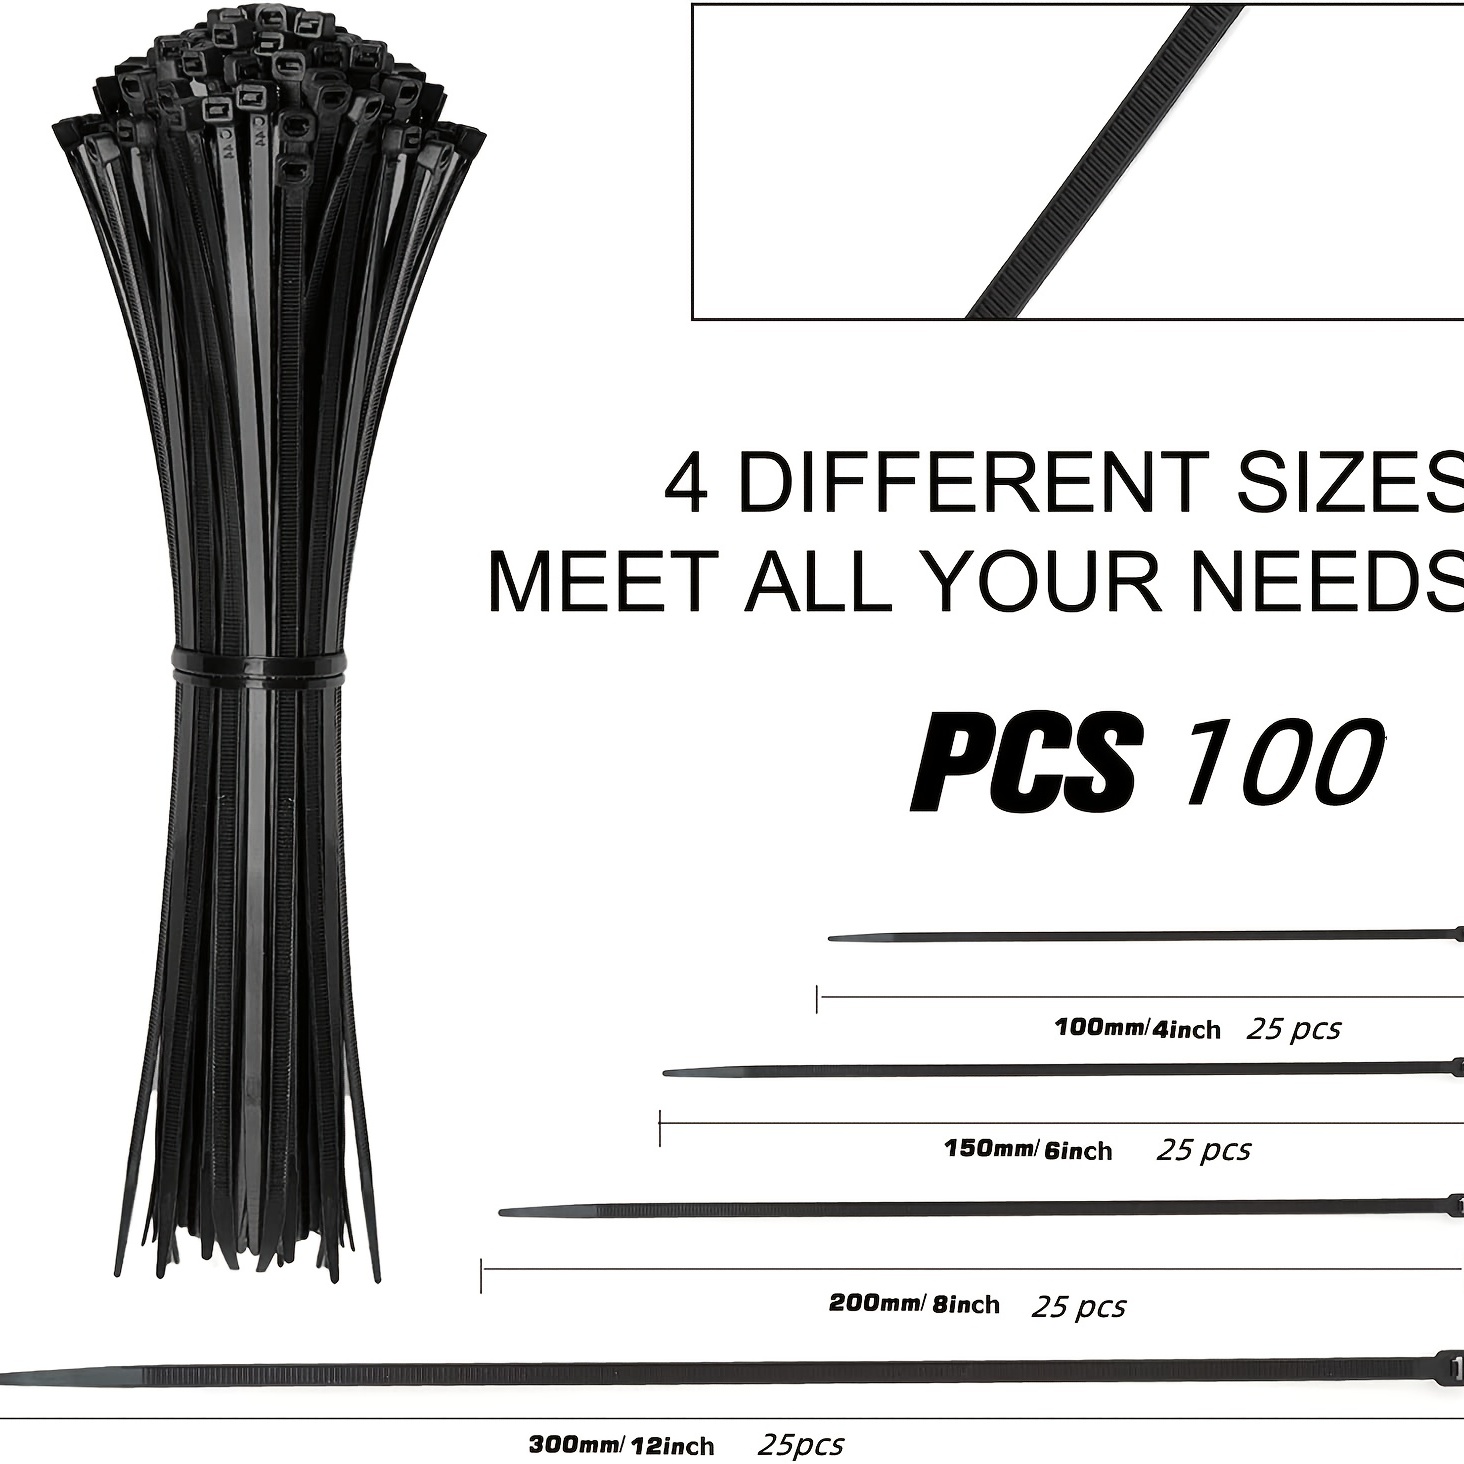 Reusable Self-Gripping Cable Ties, 1/4 X 8 Inches, Black, 25 Ties